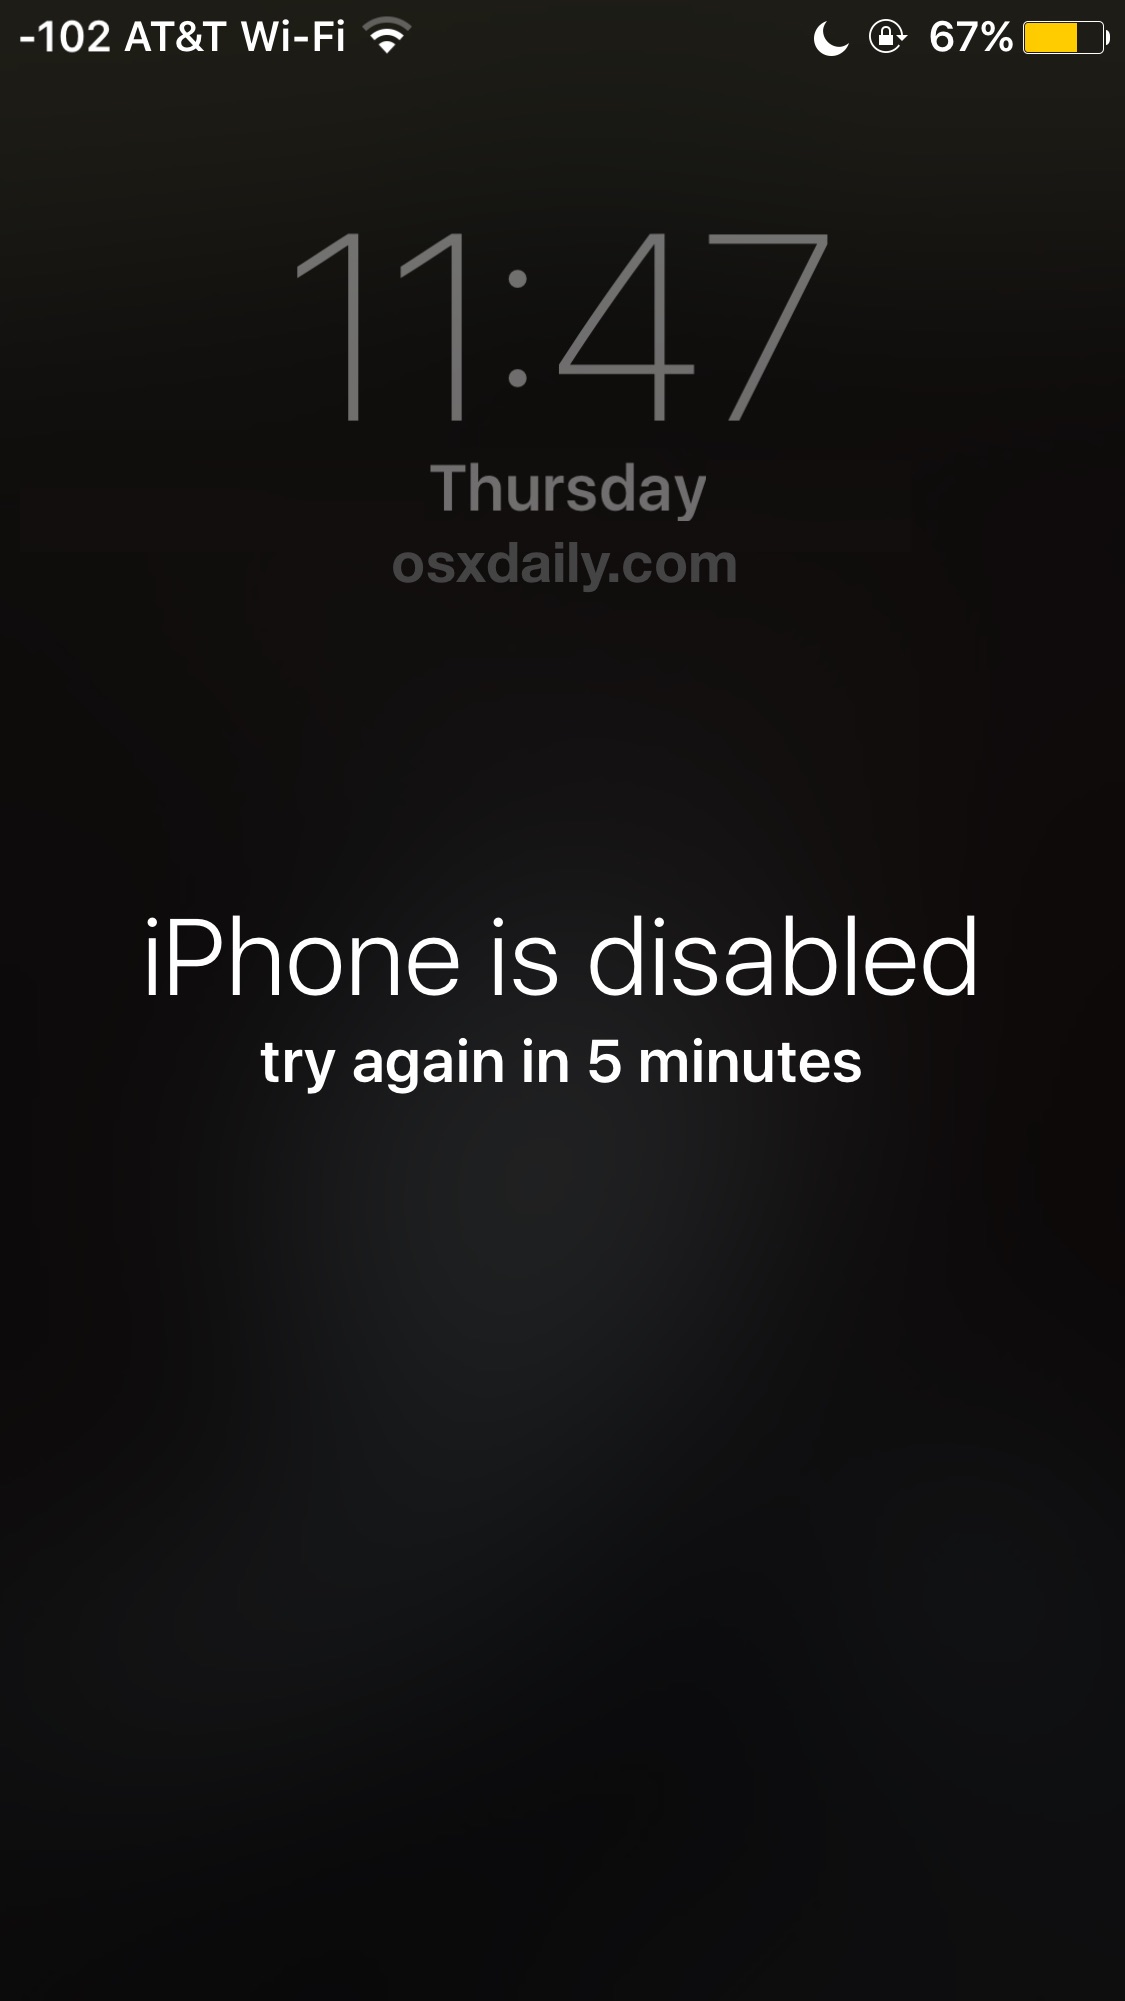 iPhone is disabled error message and how to fix it